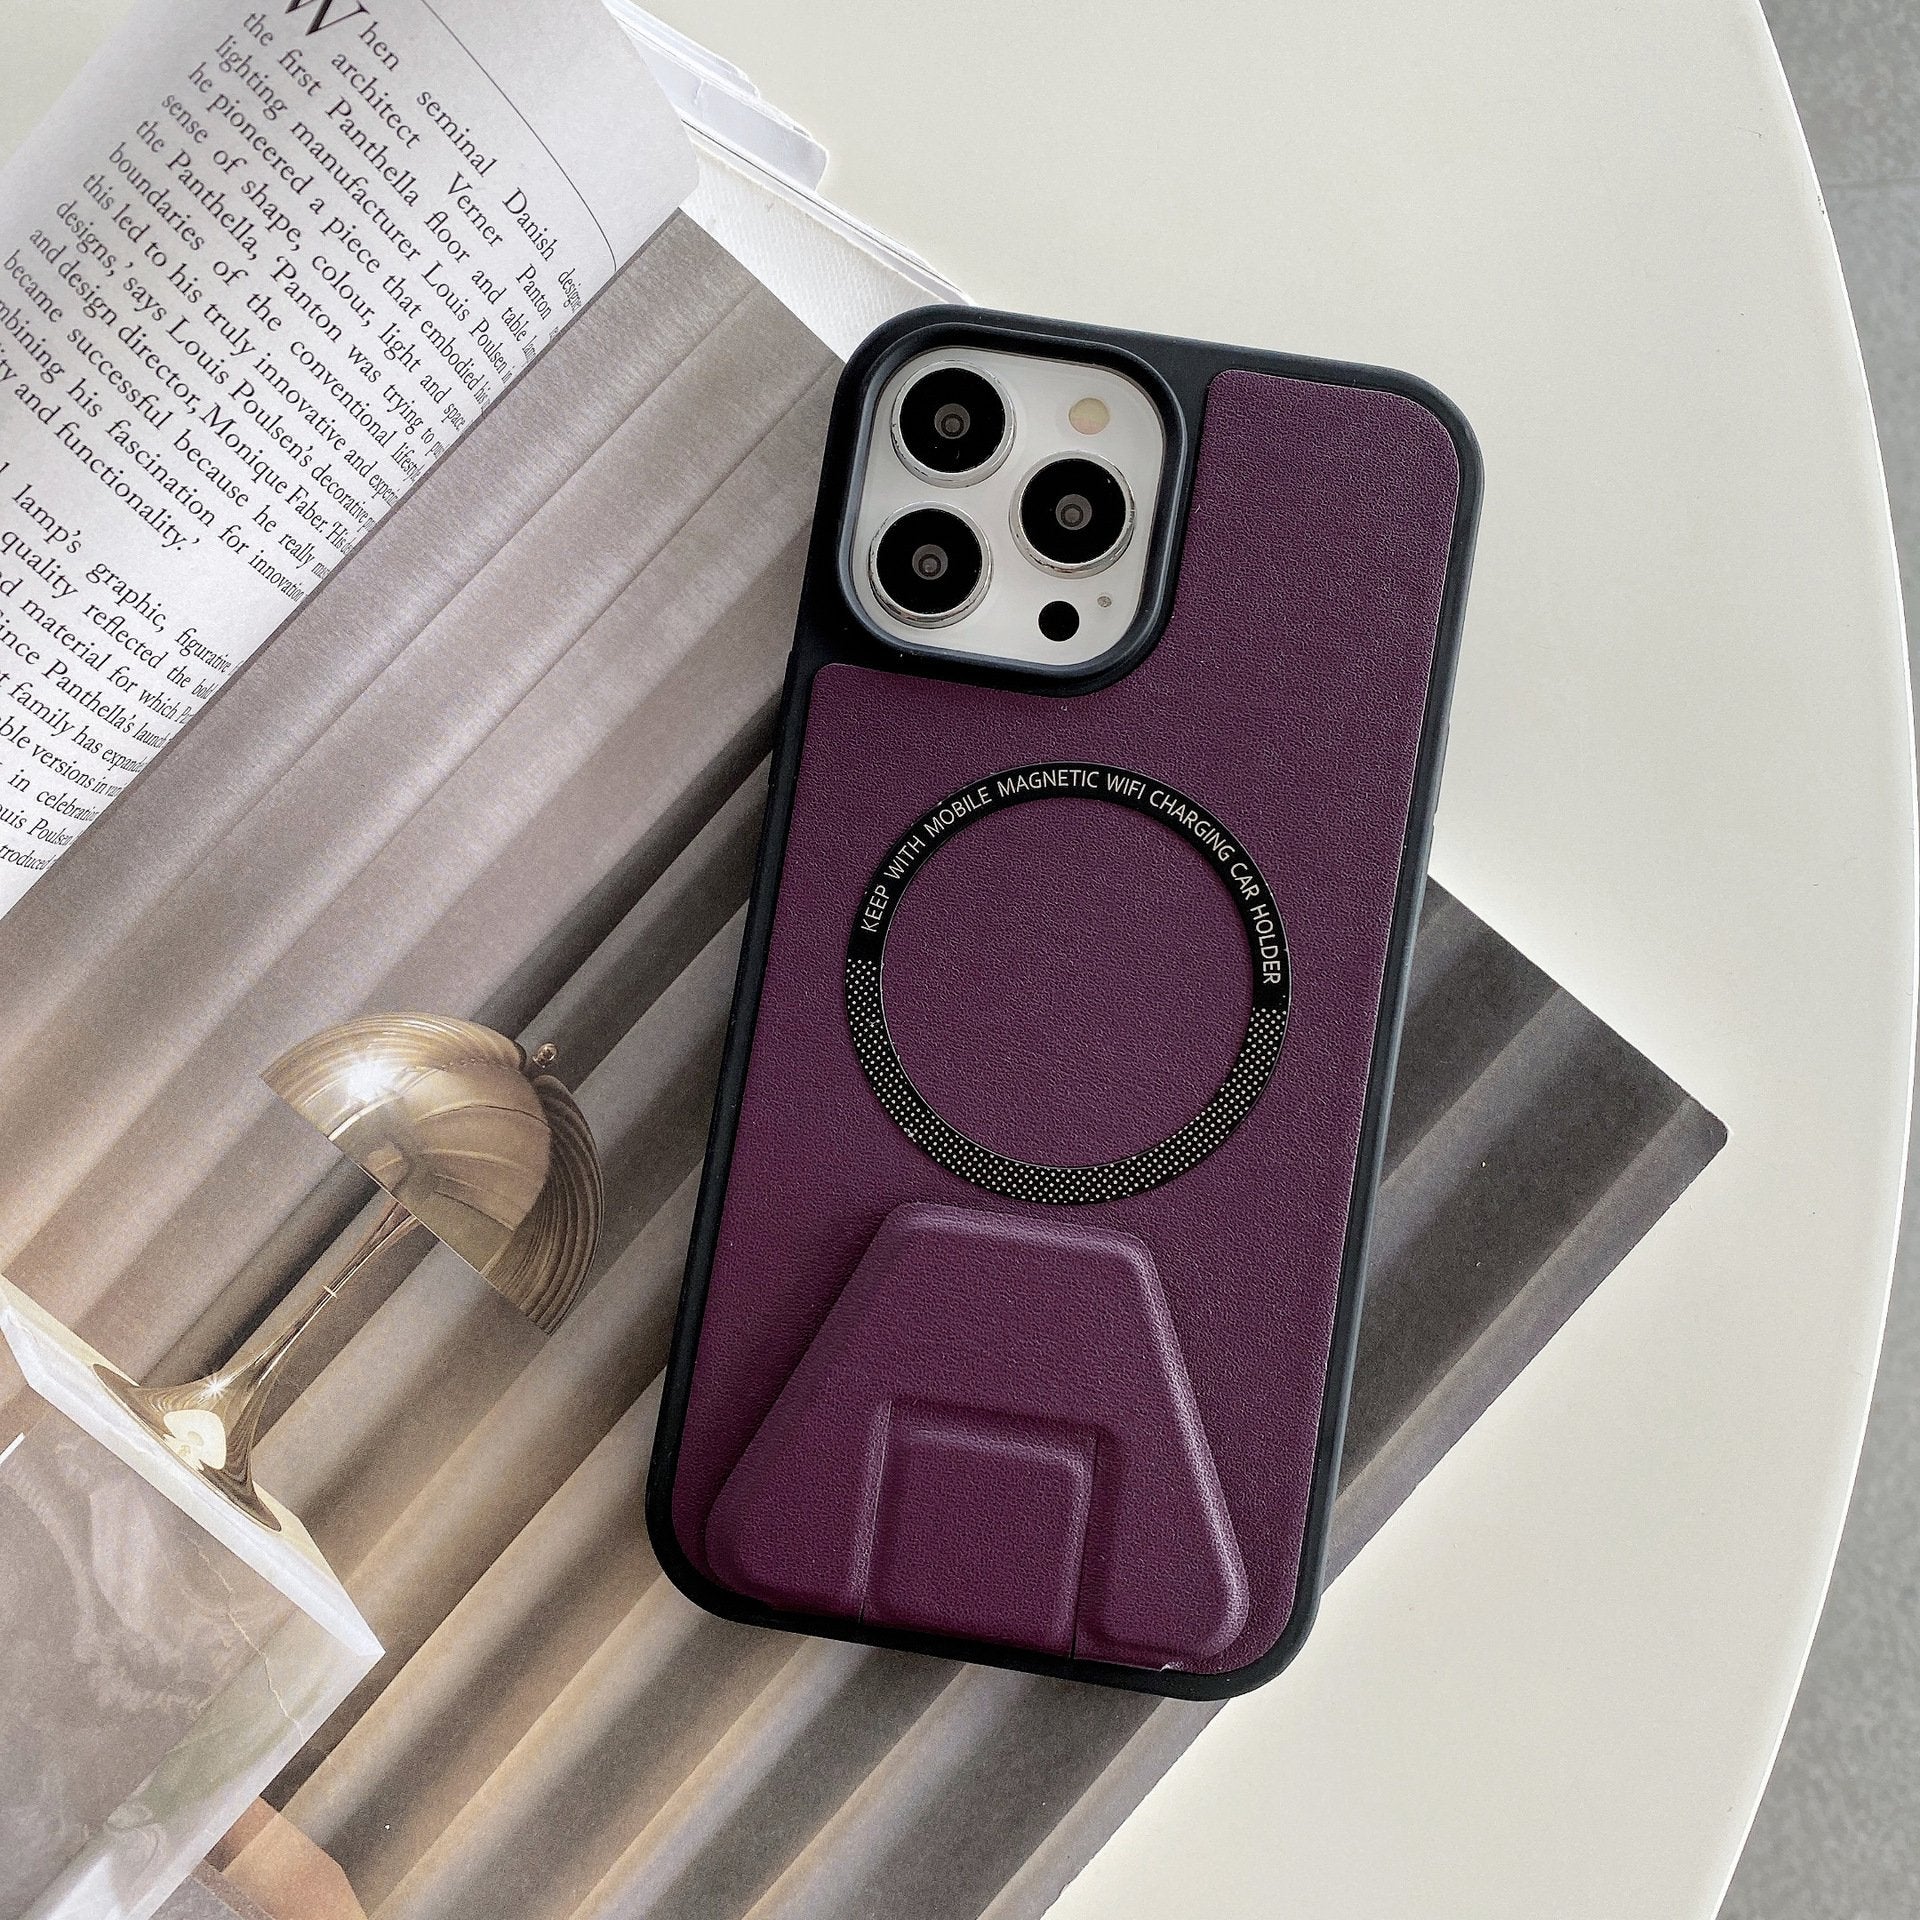 Apple Magnetic Suction Applicable Iphone 12 Phone Case Stand Solid Color Apple 14p Creative Protective Case